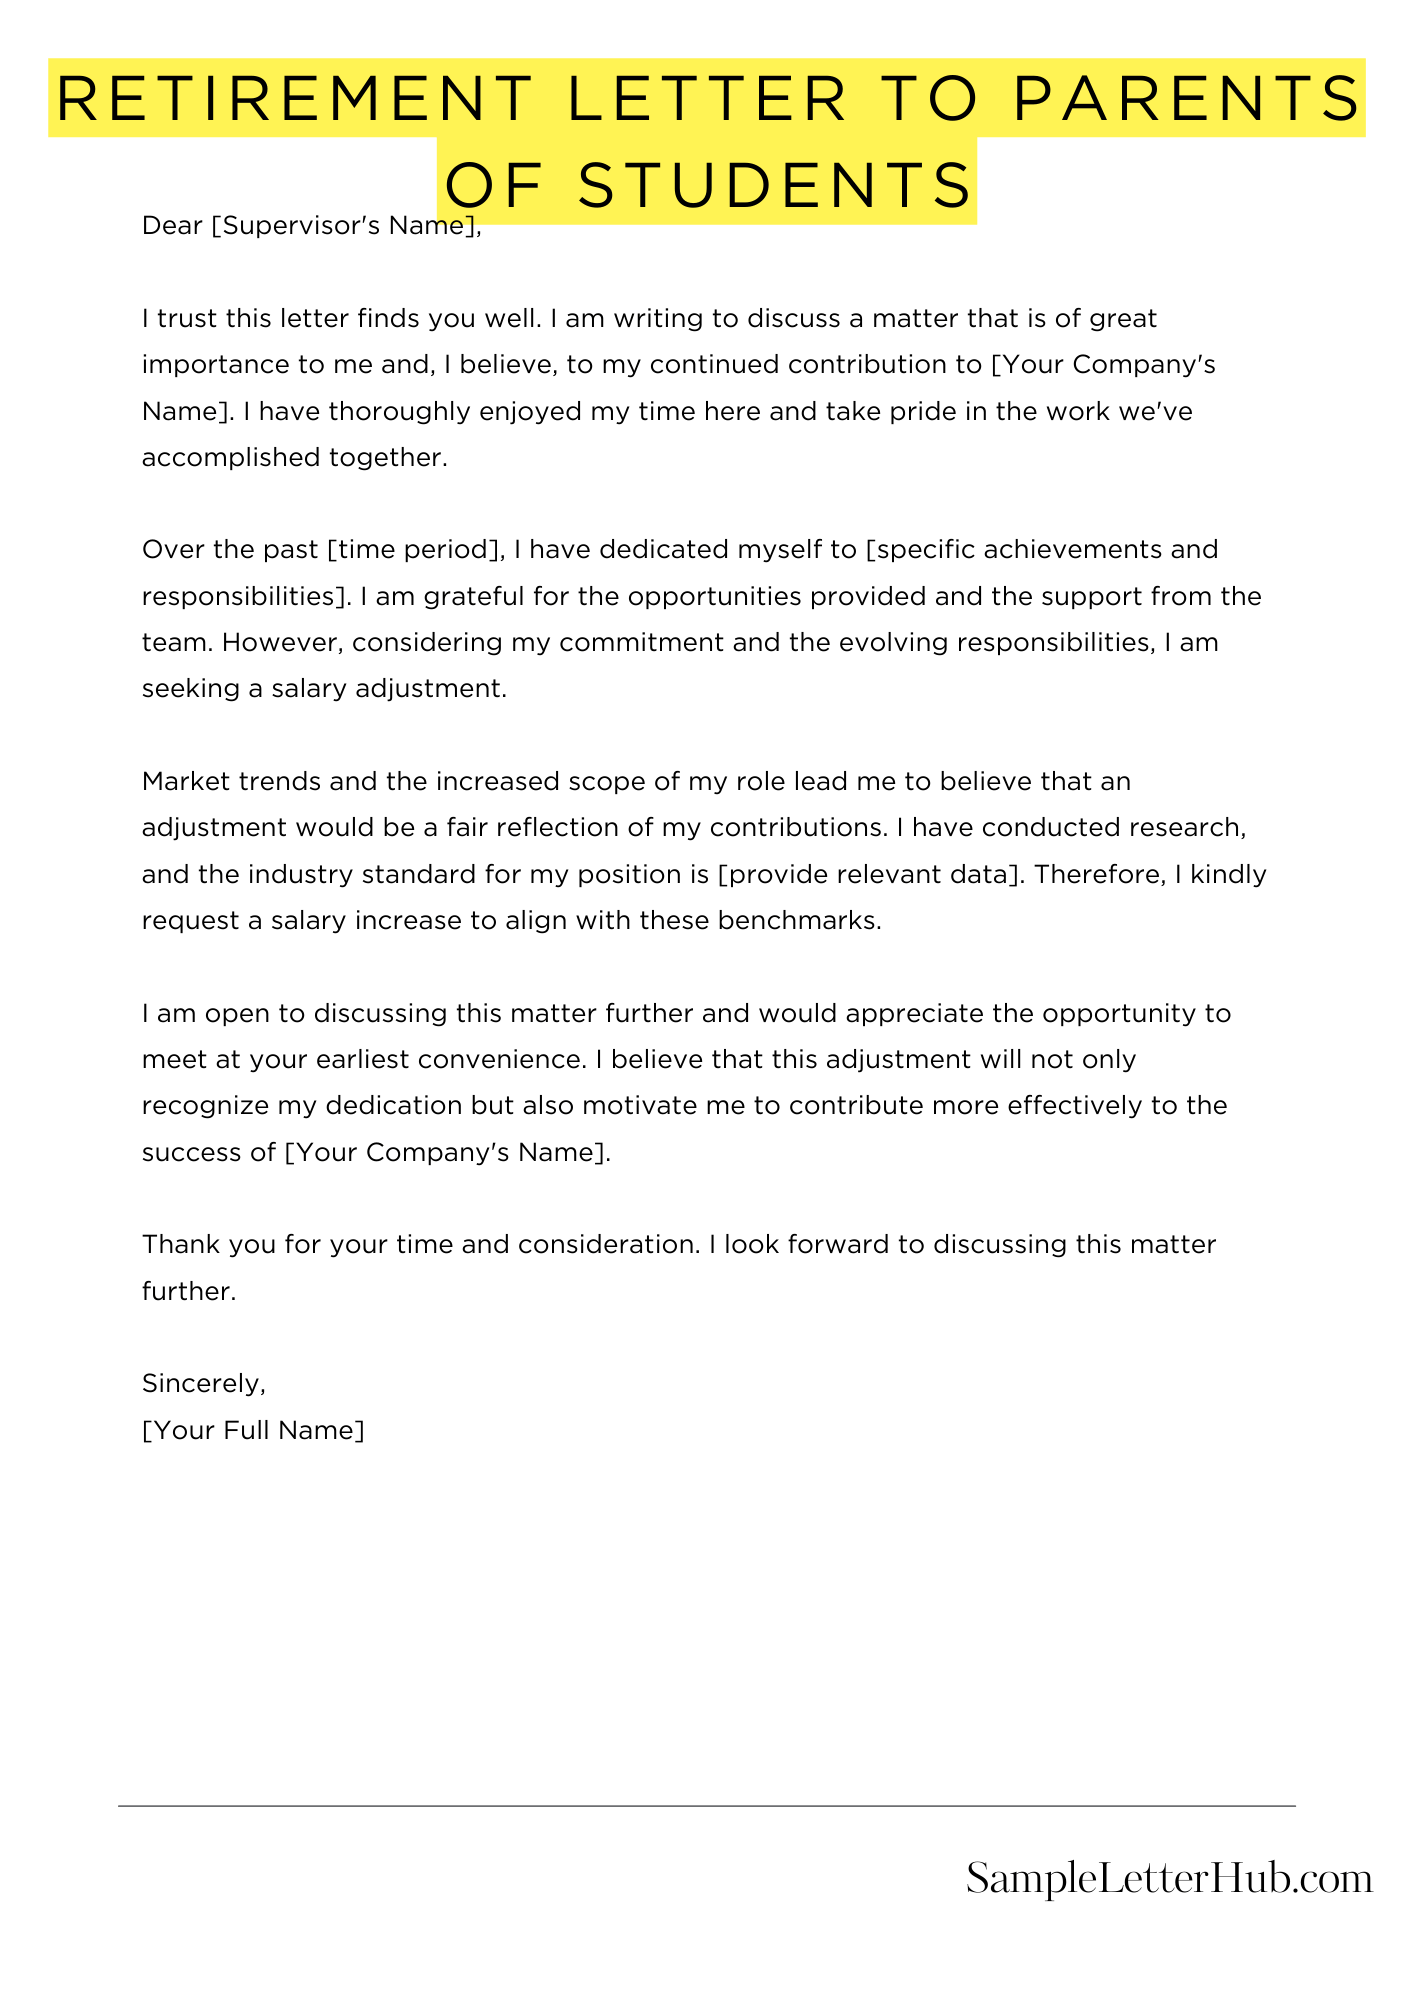 Retirement Letter To Parents Of Students